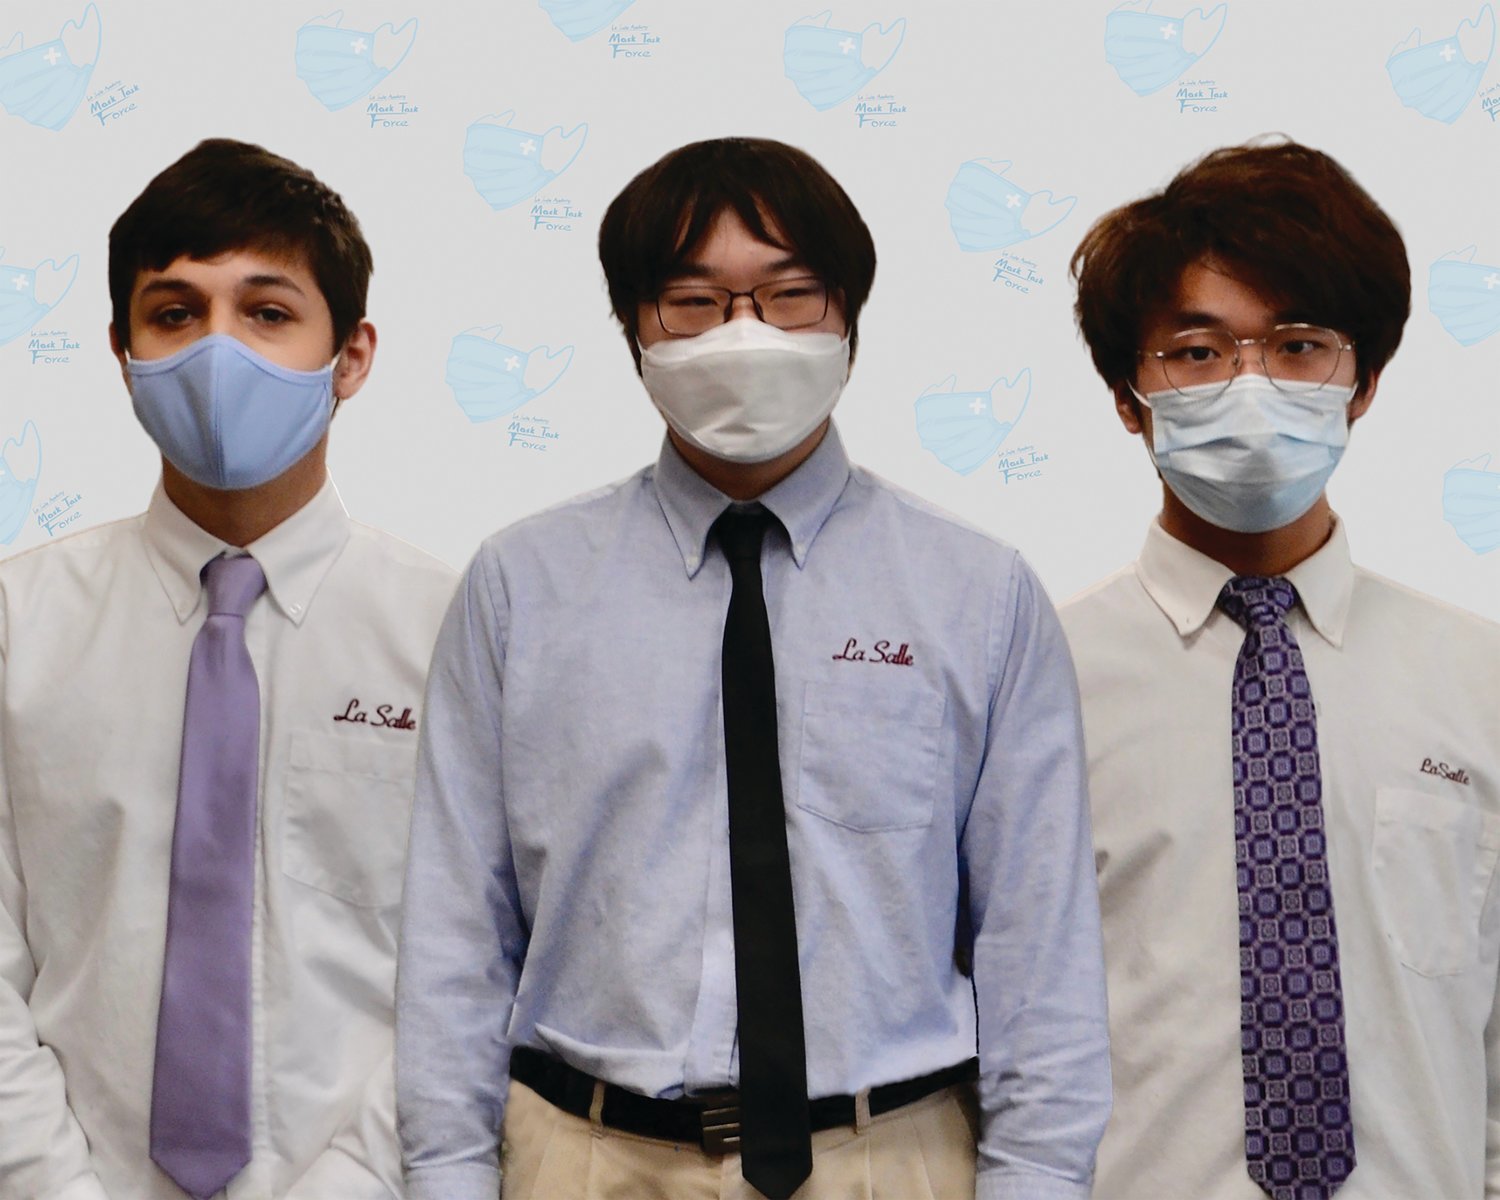 A project initiated by three La Salle Academy students resulted in seven local nonprofits receiving 4,000 medical face masks and the creation of a poster aimed at educating the community about COVID-19 safety. Pictured from left, Gianni Diarbi ‘22, Peter Cheng ‘21, and Tianli Jiang ‘21.